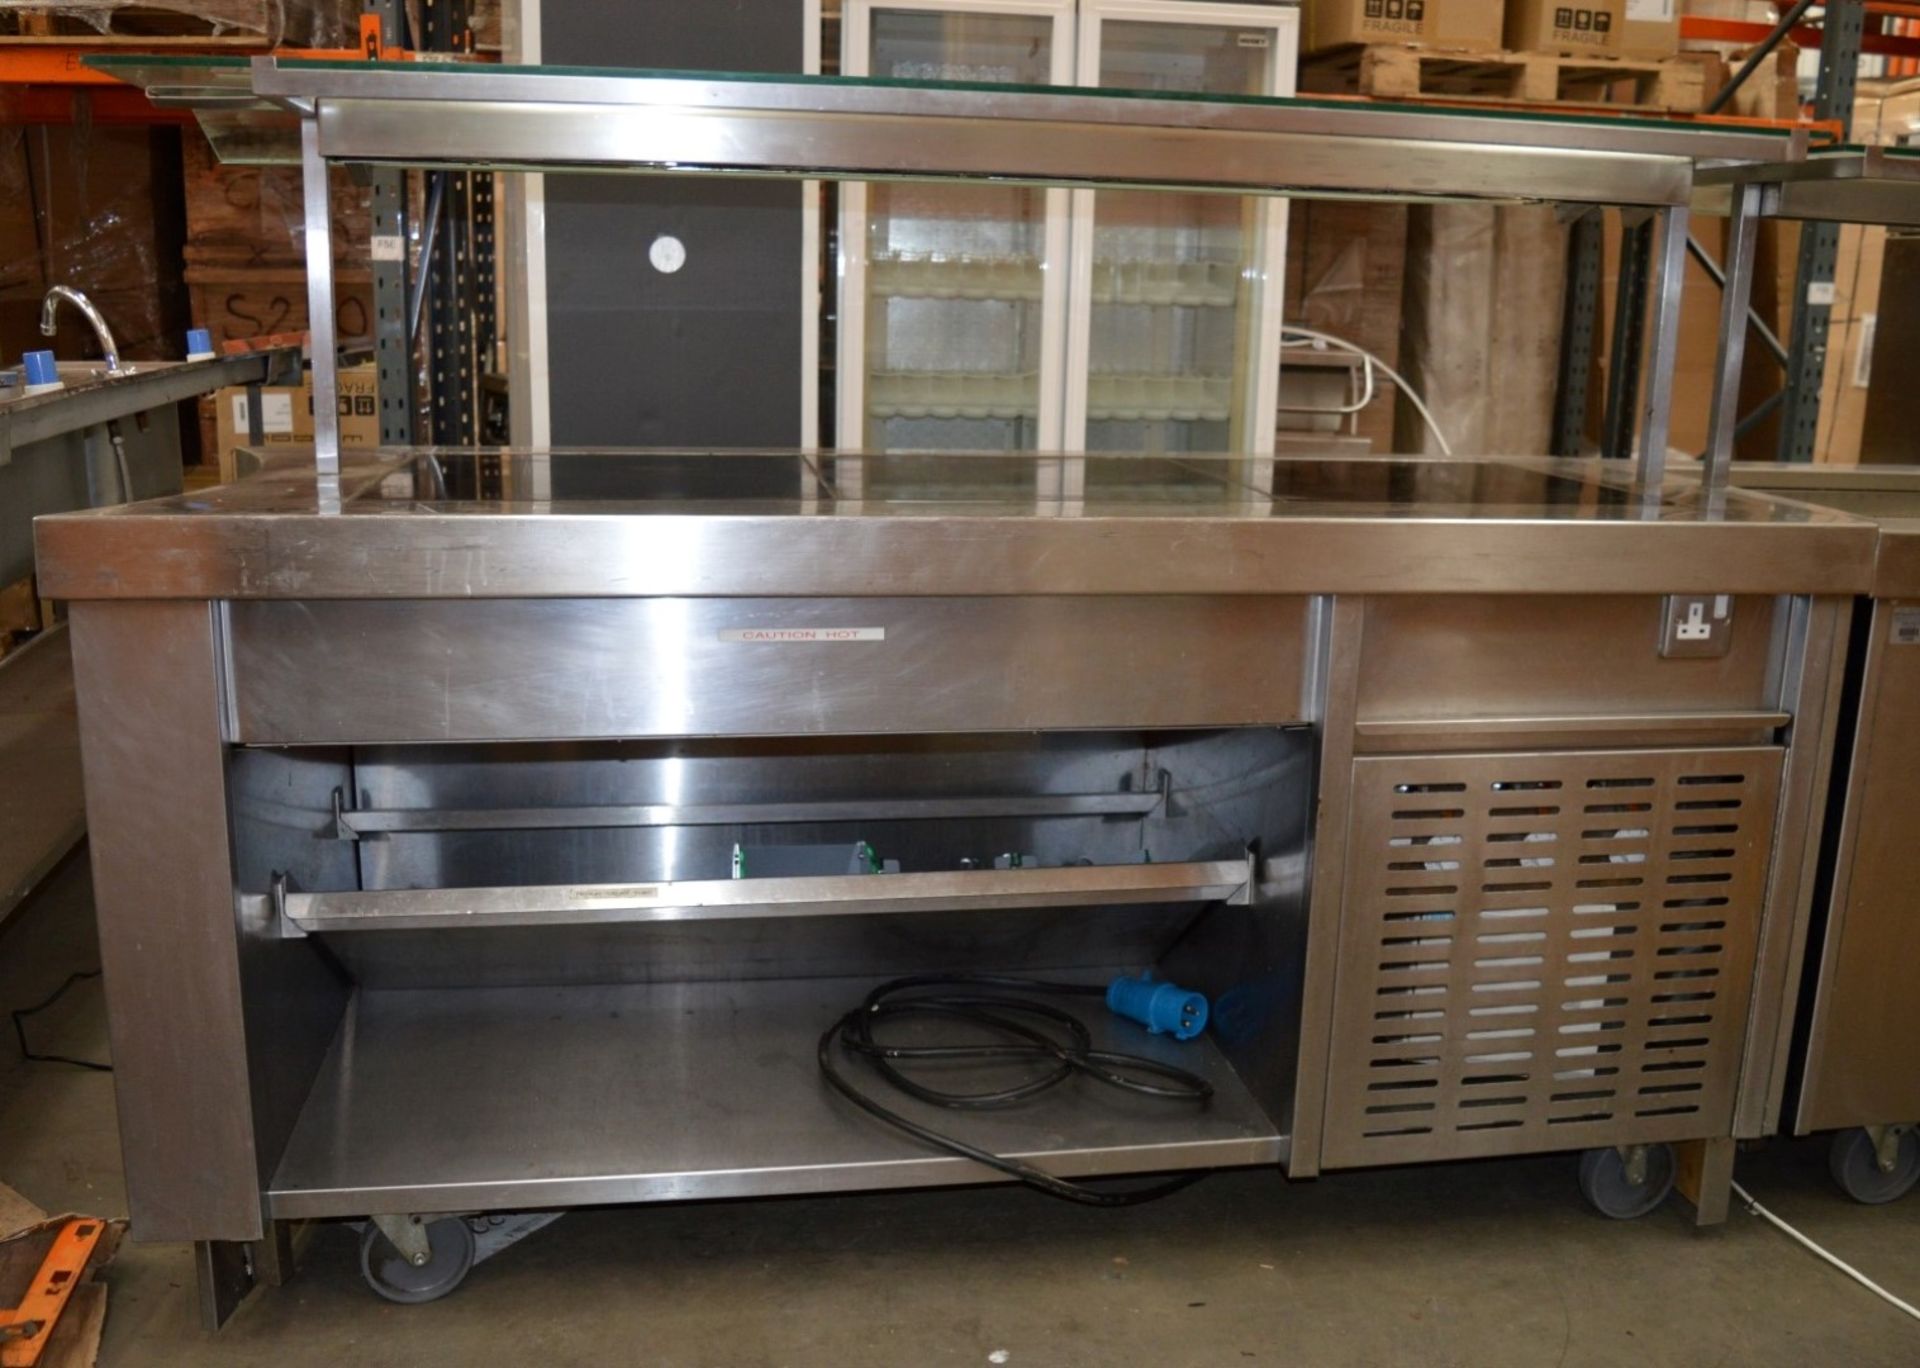 1 x Heated Ceran Serving Counter - Triple Ceran Hot Plates Plus Overhead Heating - On Castors For - Image 4 of 6